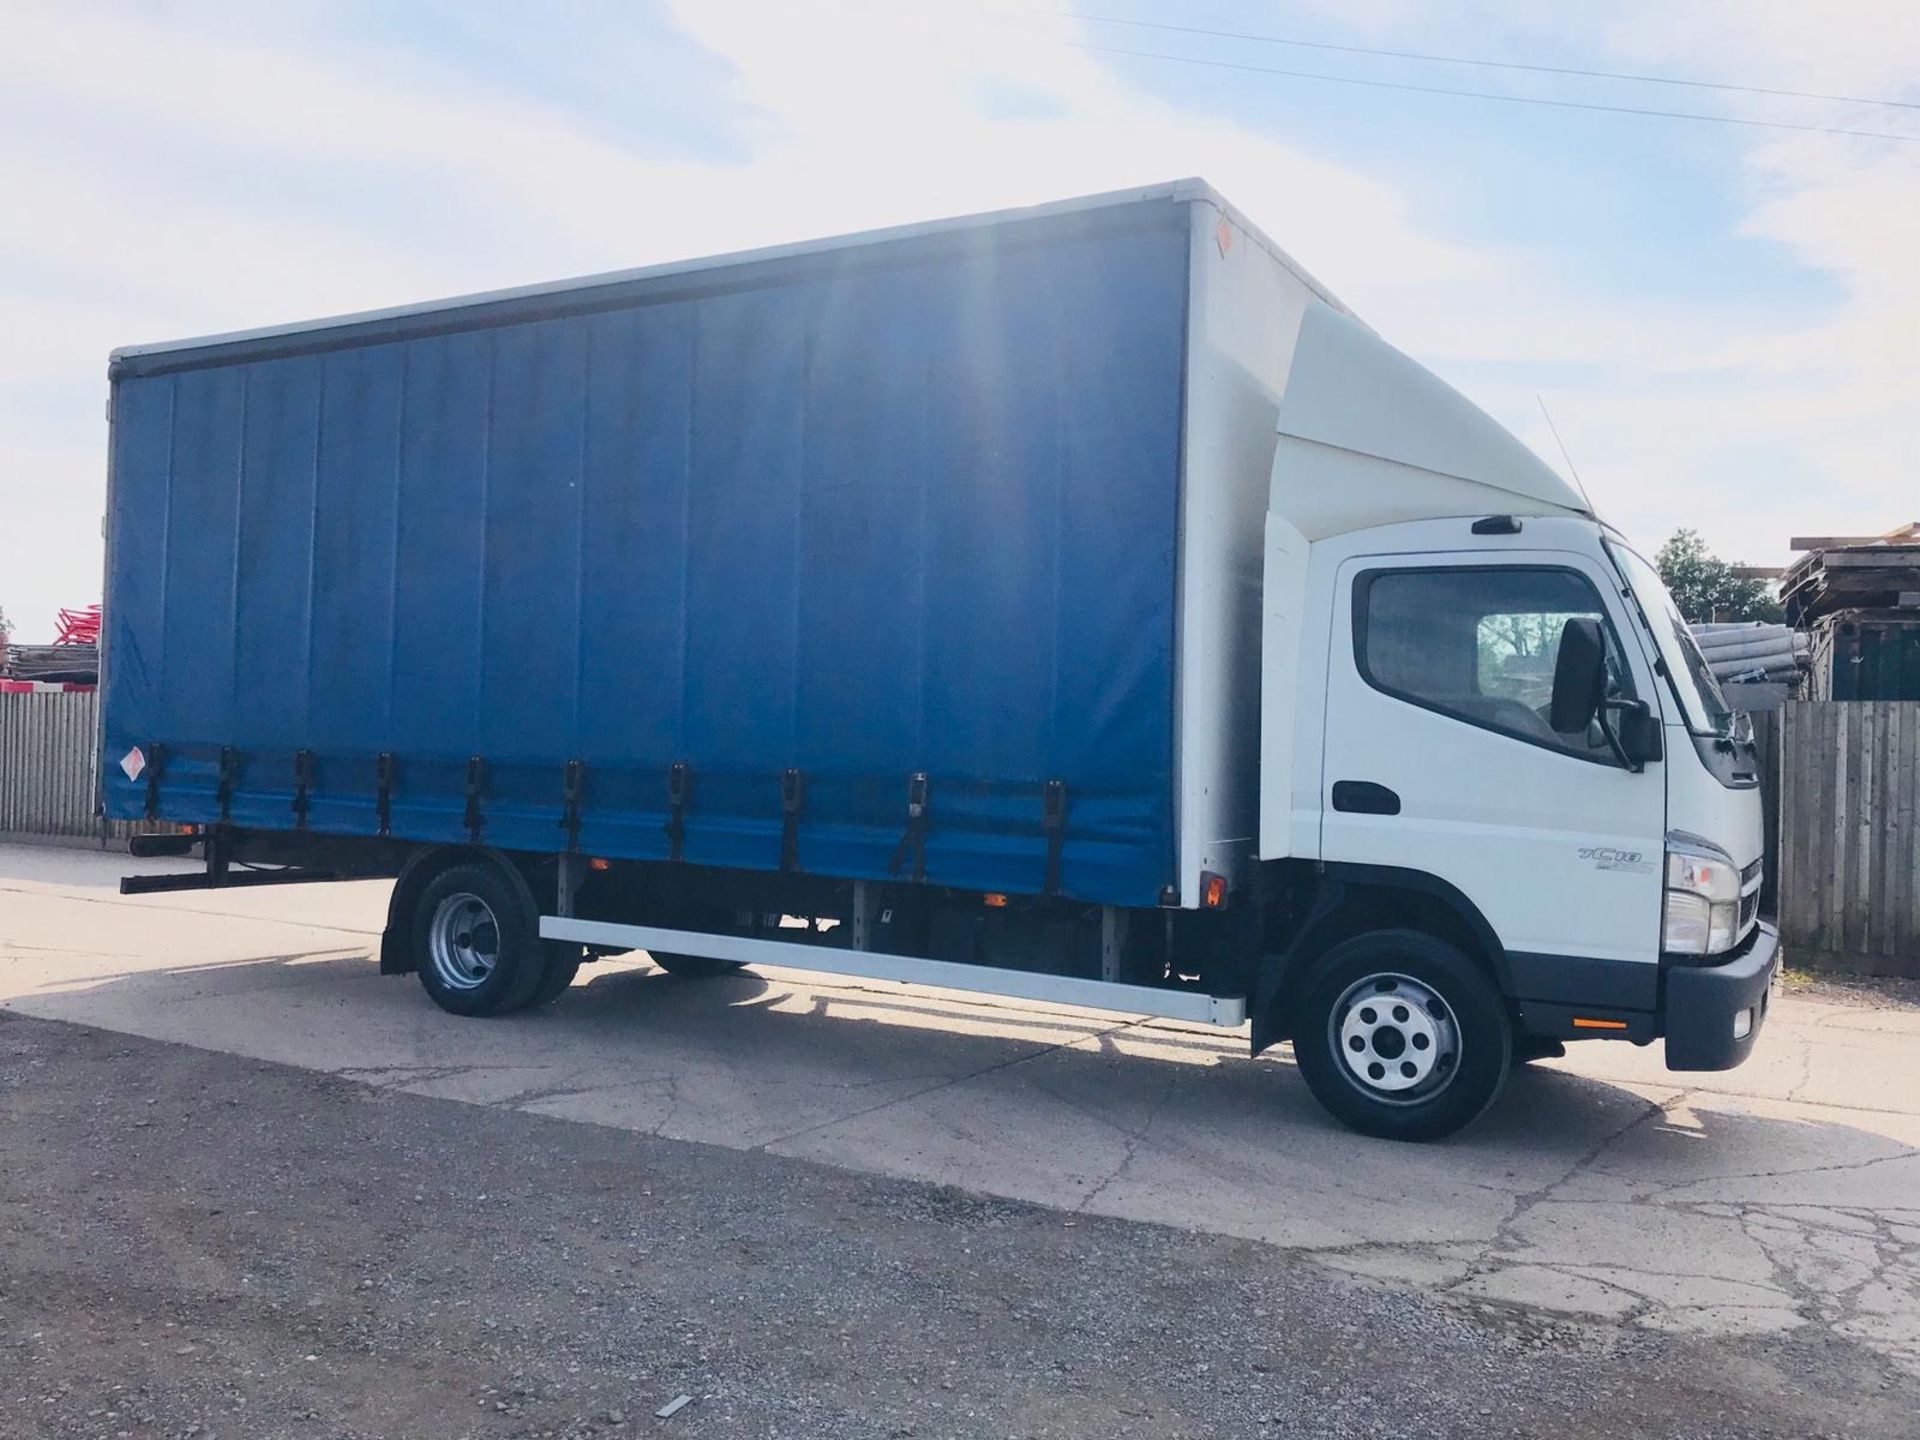 On Sale MITSUBISHI CANTER 7C18 "LWB" 22 FOOT CURTAINSIDER TRUCK - 6 SPEED MANUAL - 11 REG BARN DOORS - Image 10 of 21